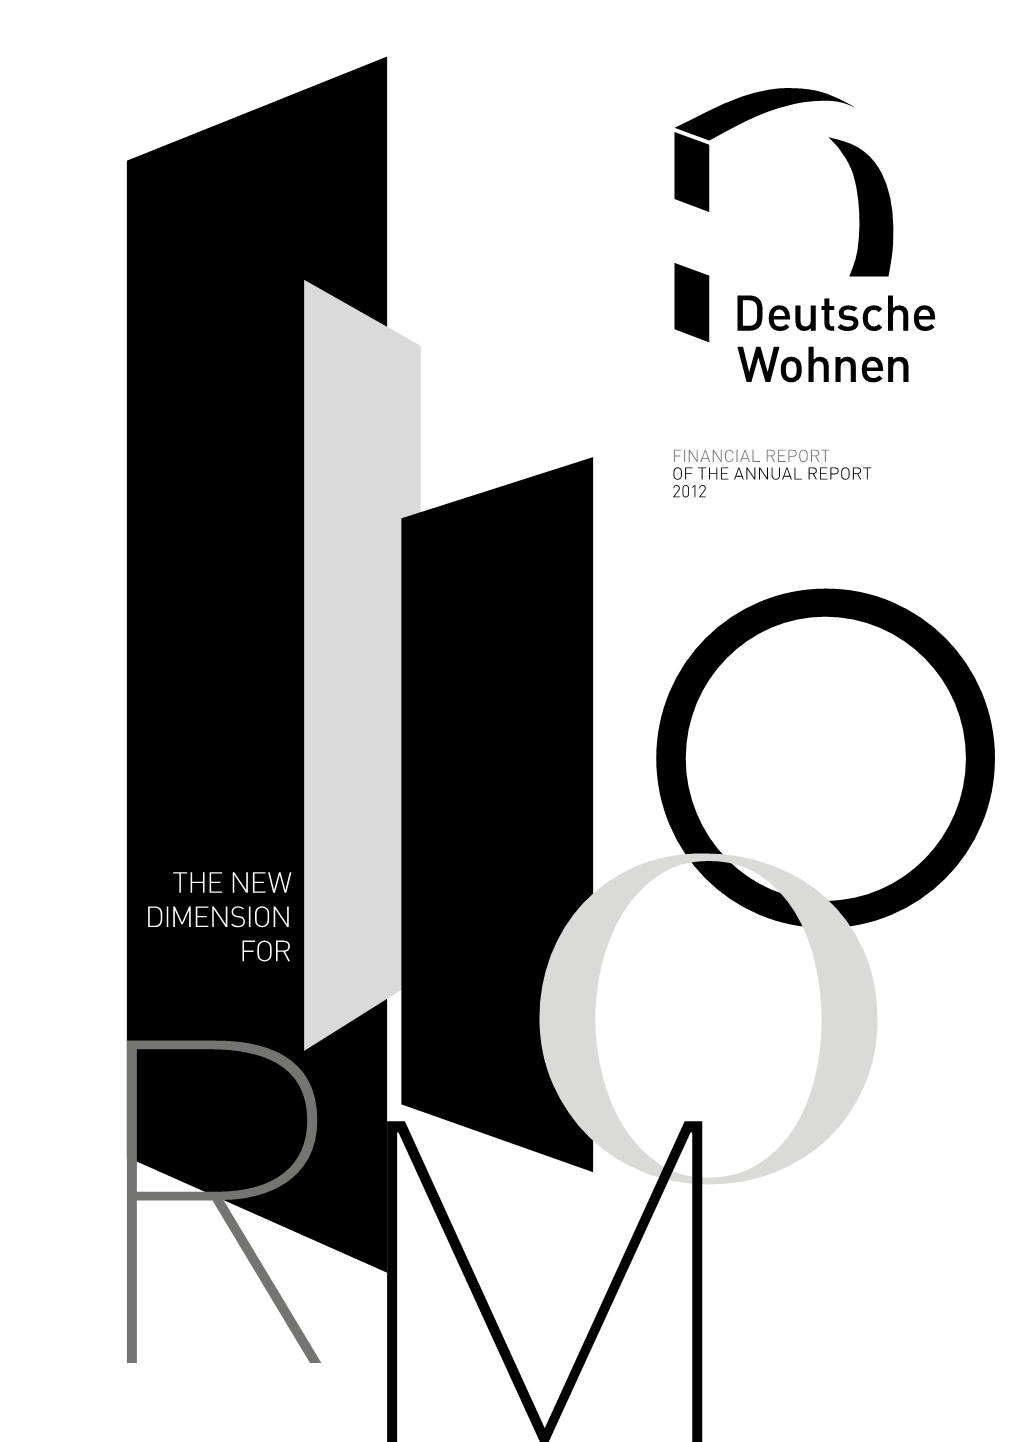 The New Dimension for Group Key Figures of the Deutsche Wohnen AG